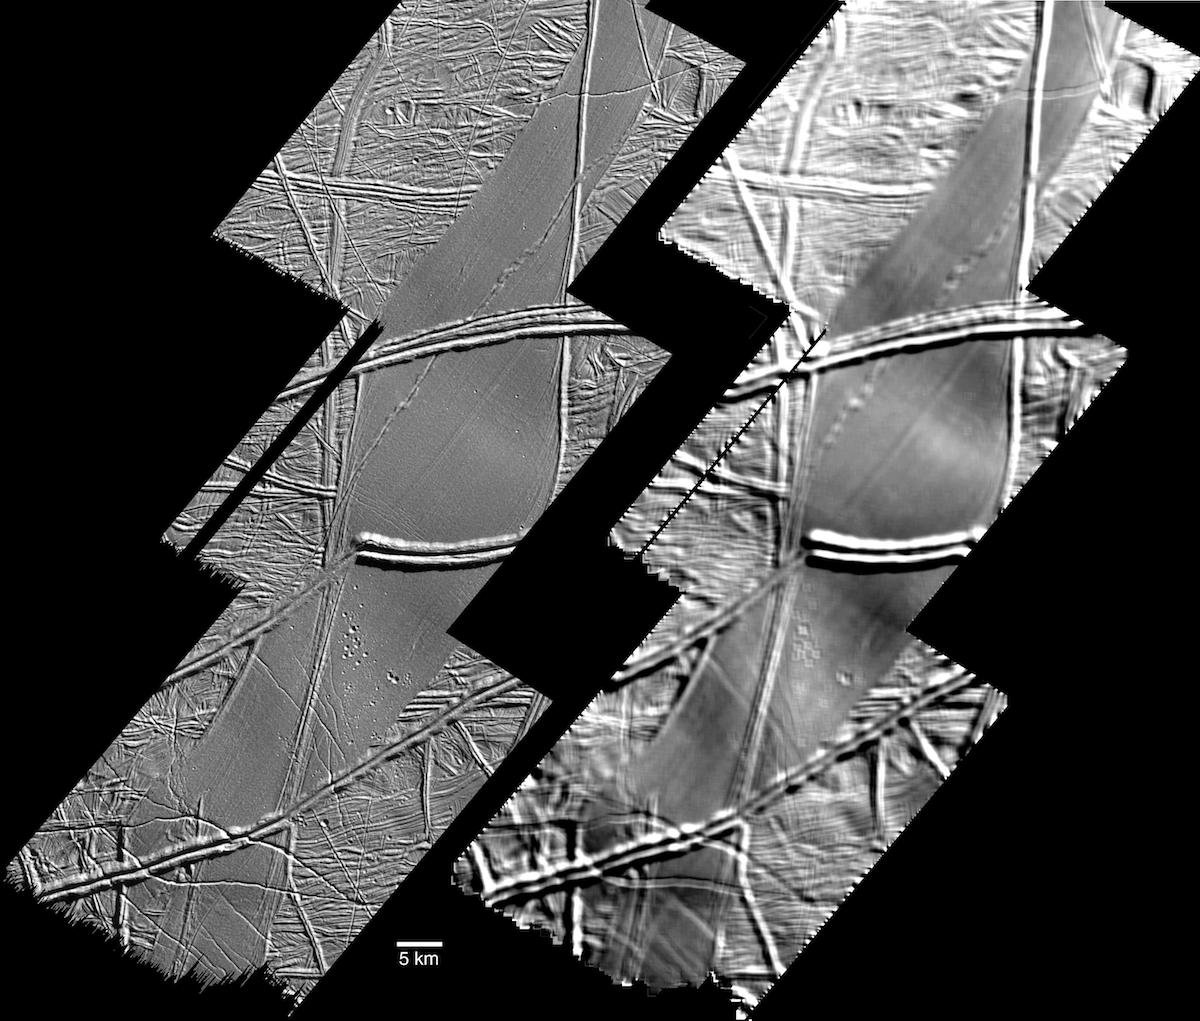 two black and white views of ridged surface under different lighting conditions